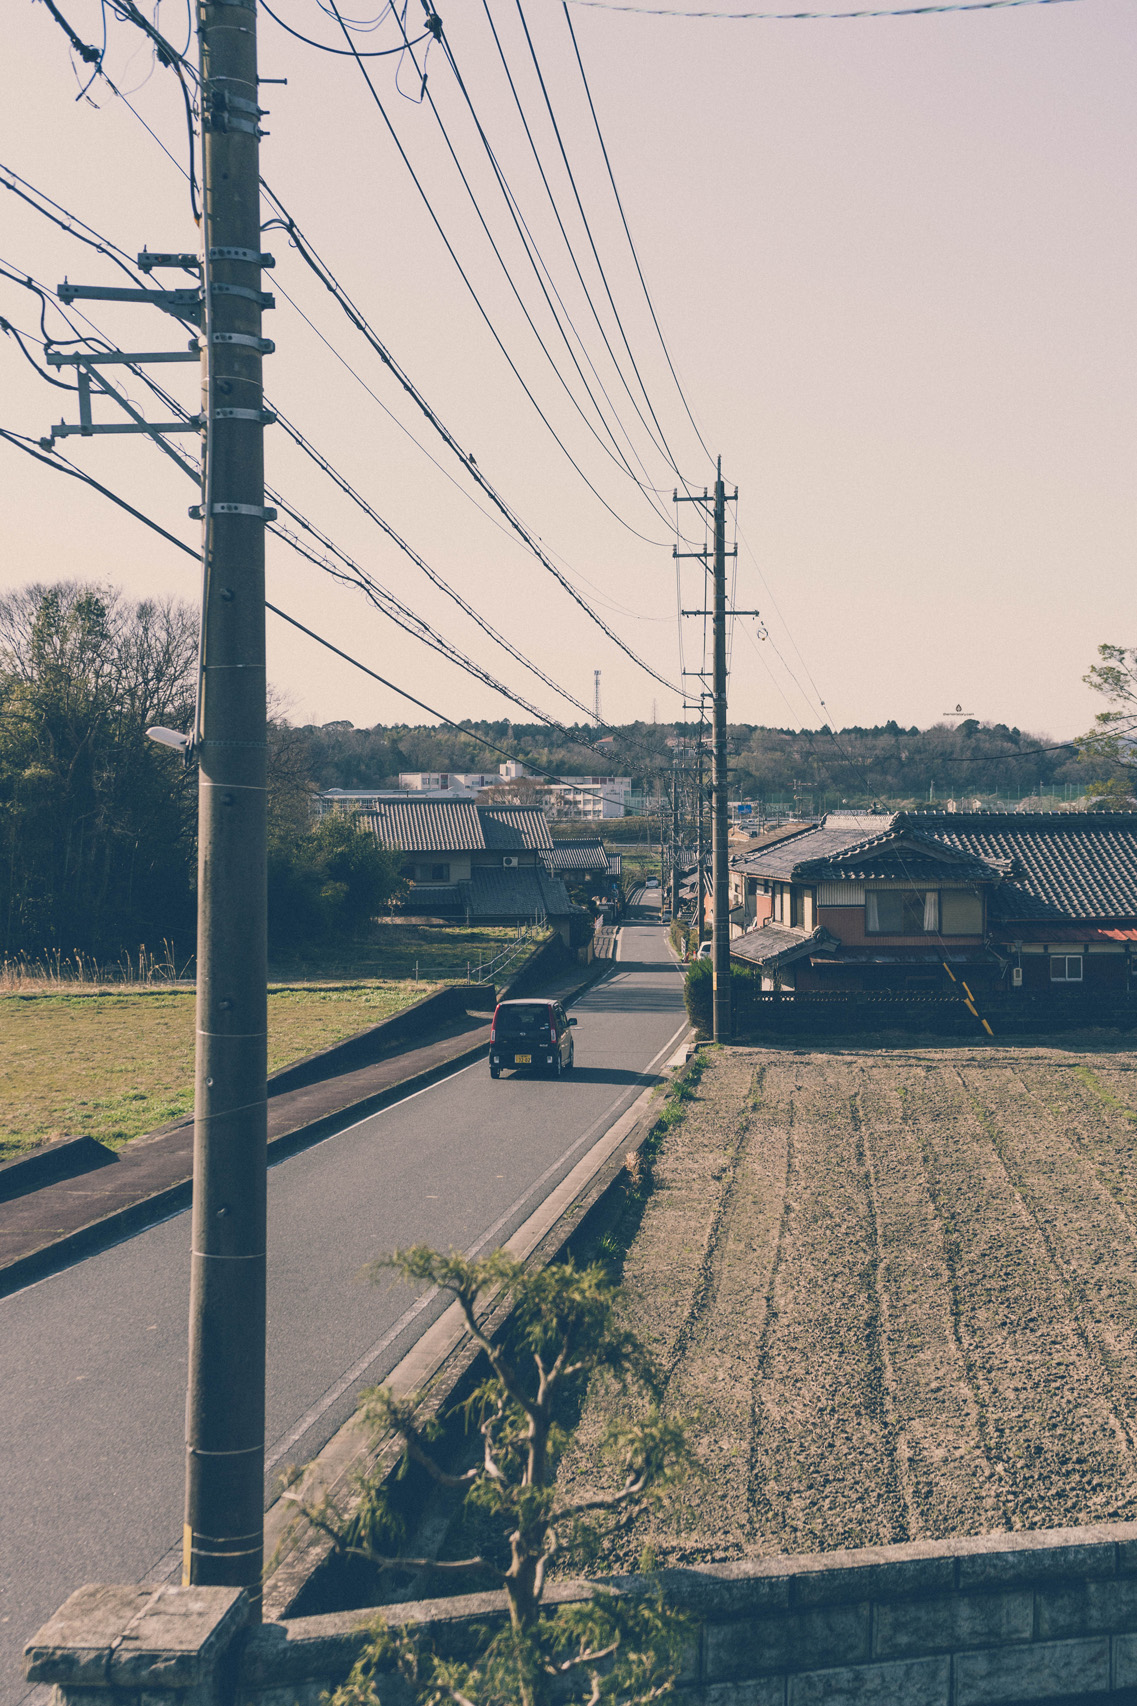 On the street in Iga, Mie prefecture